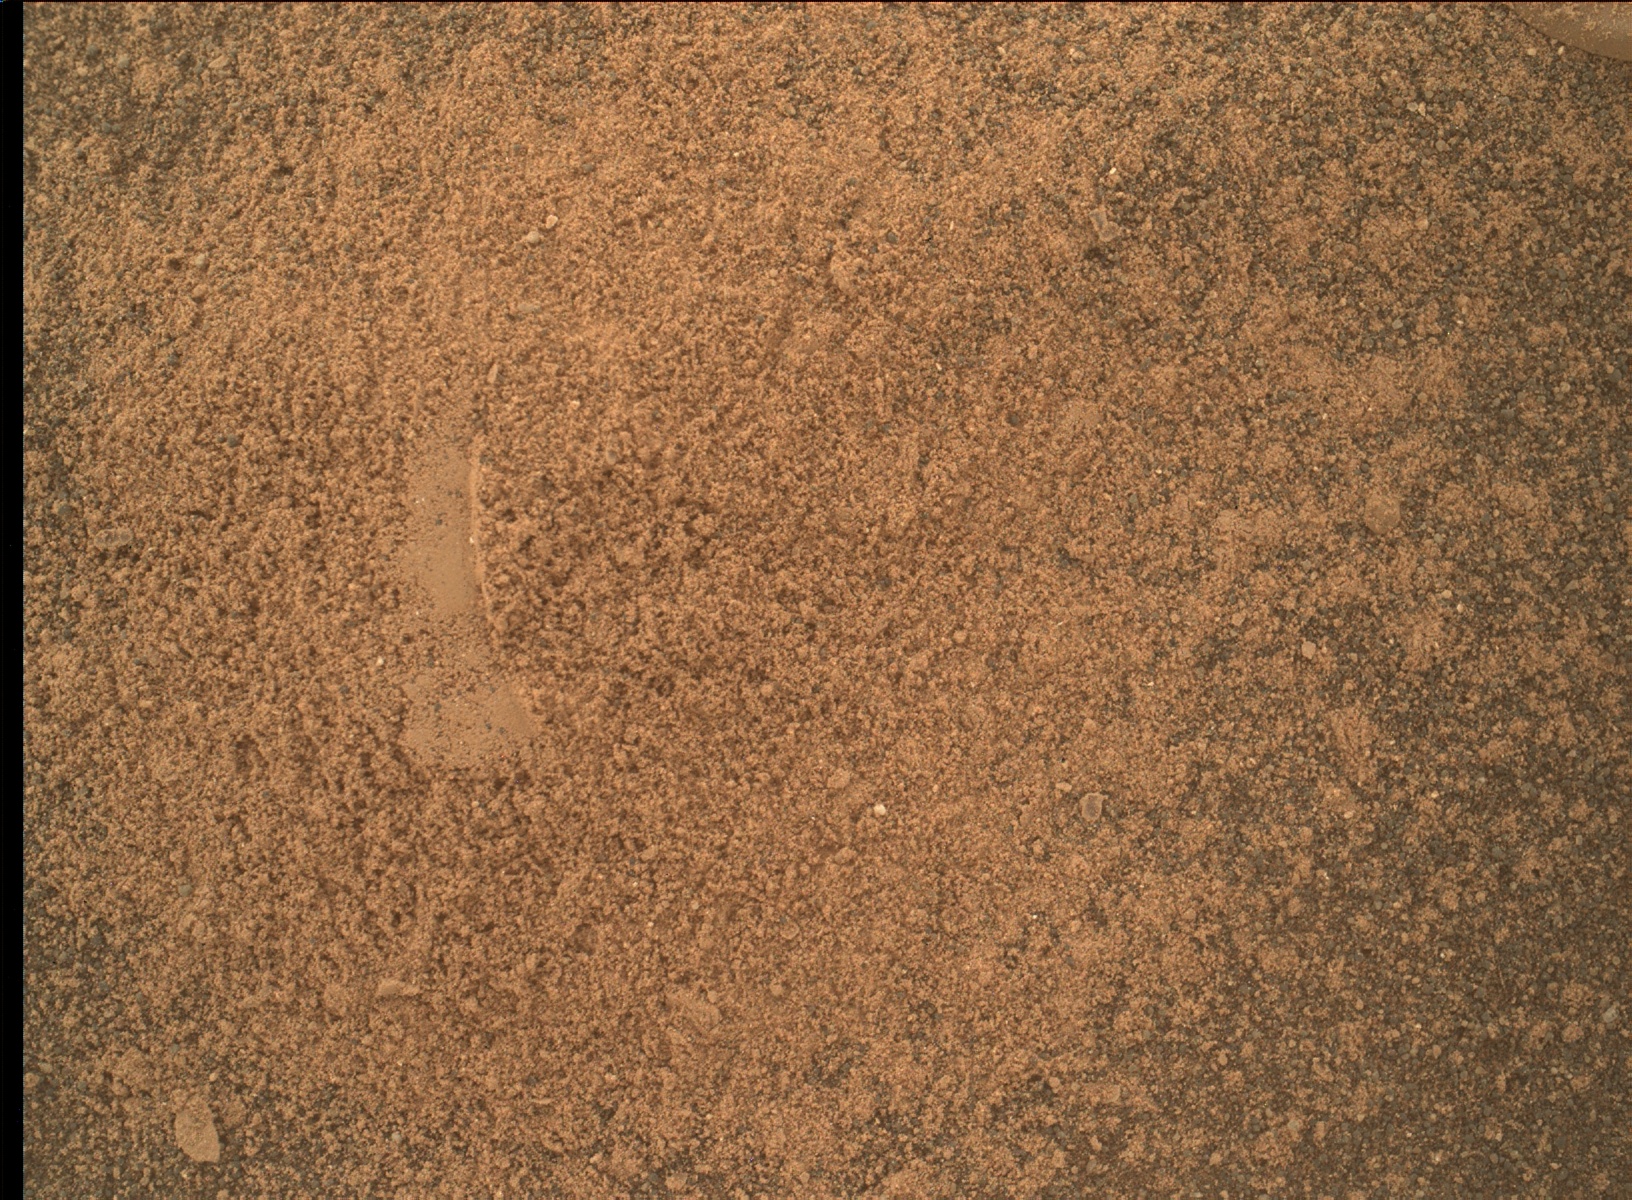 Nasa's Mars rover Curiosity acquired this image using its Mars Hand Lens Imager (MAHLI) on Sol 2380